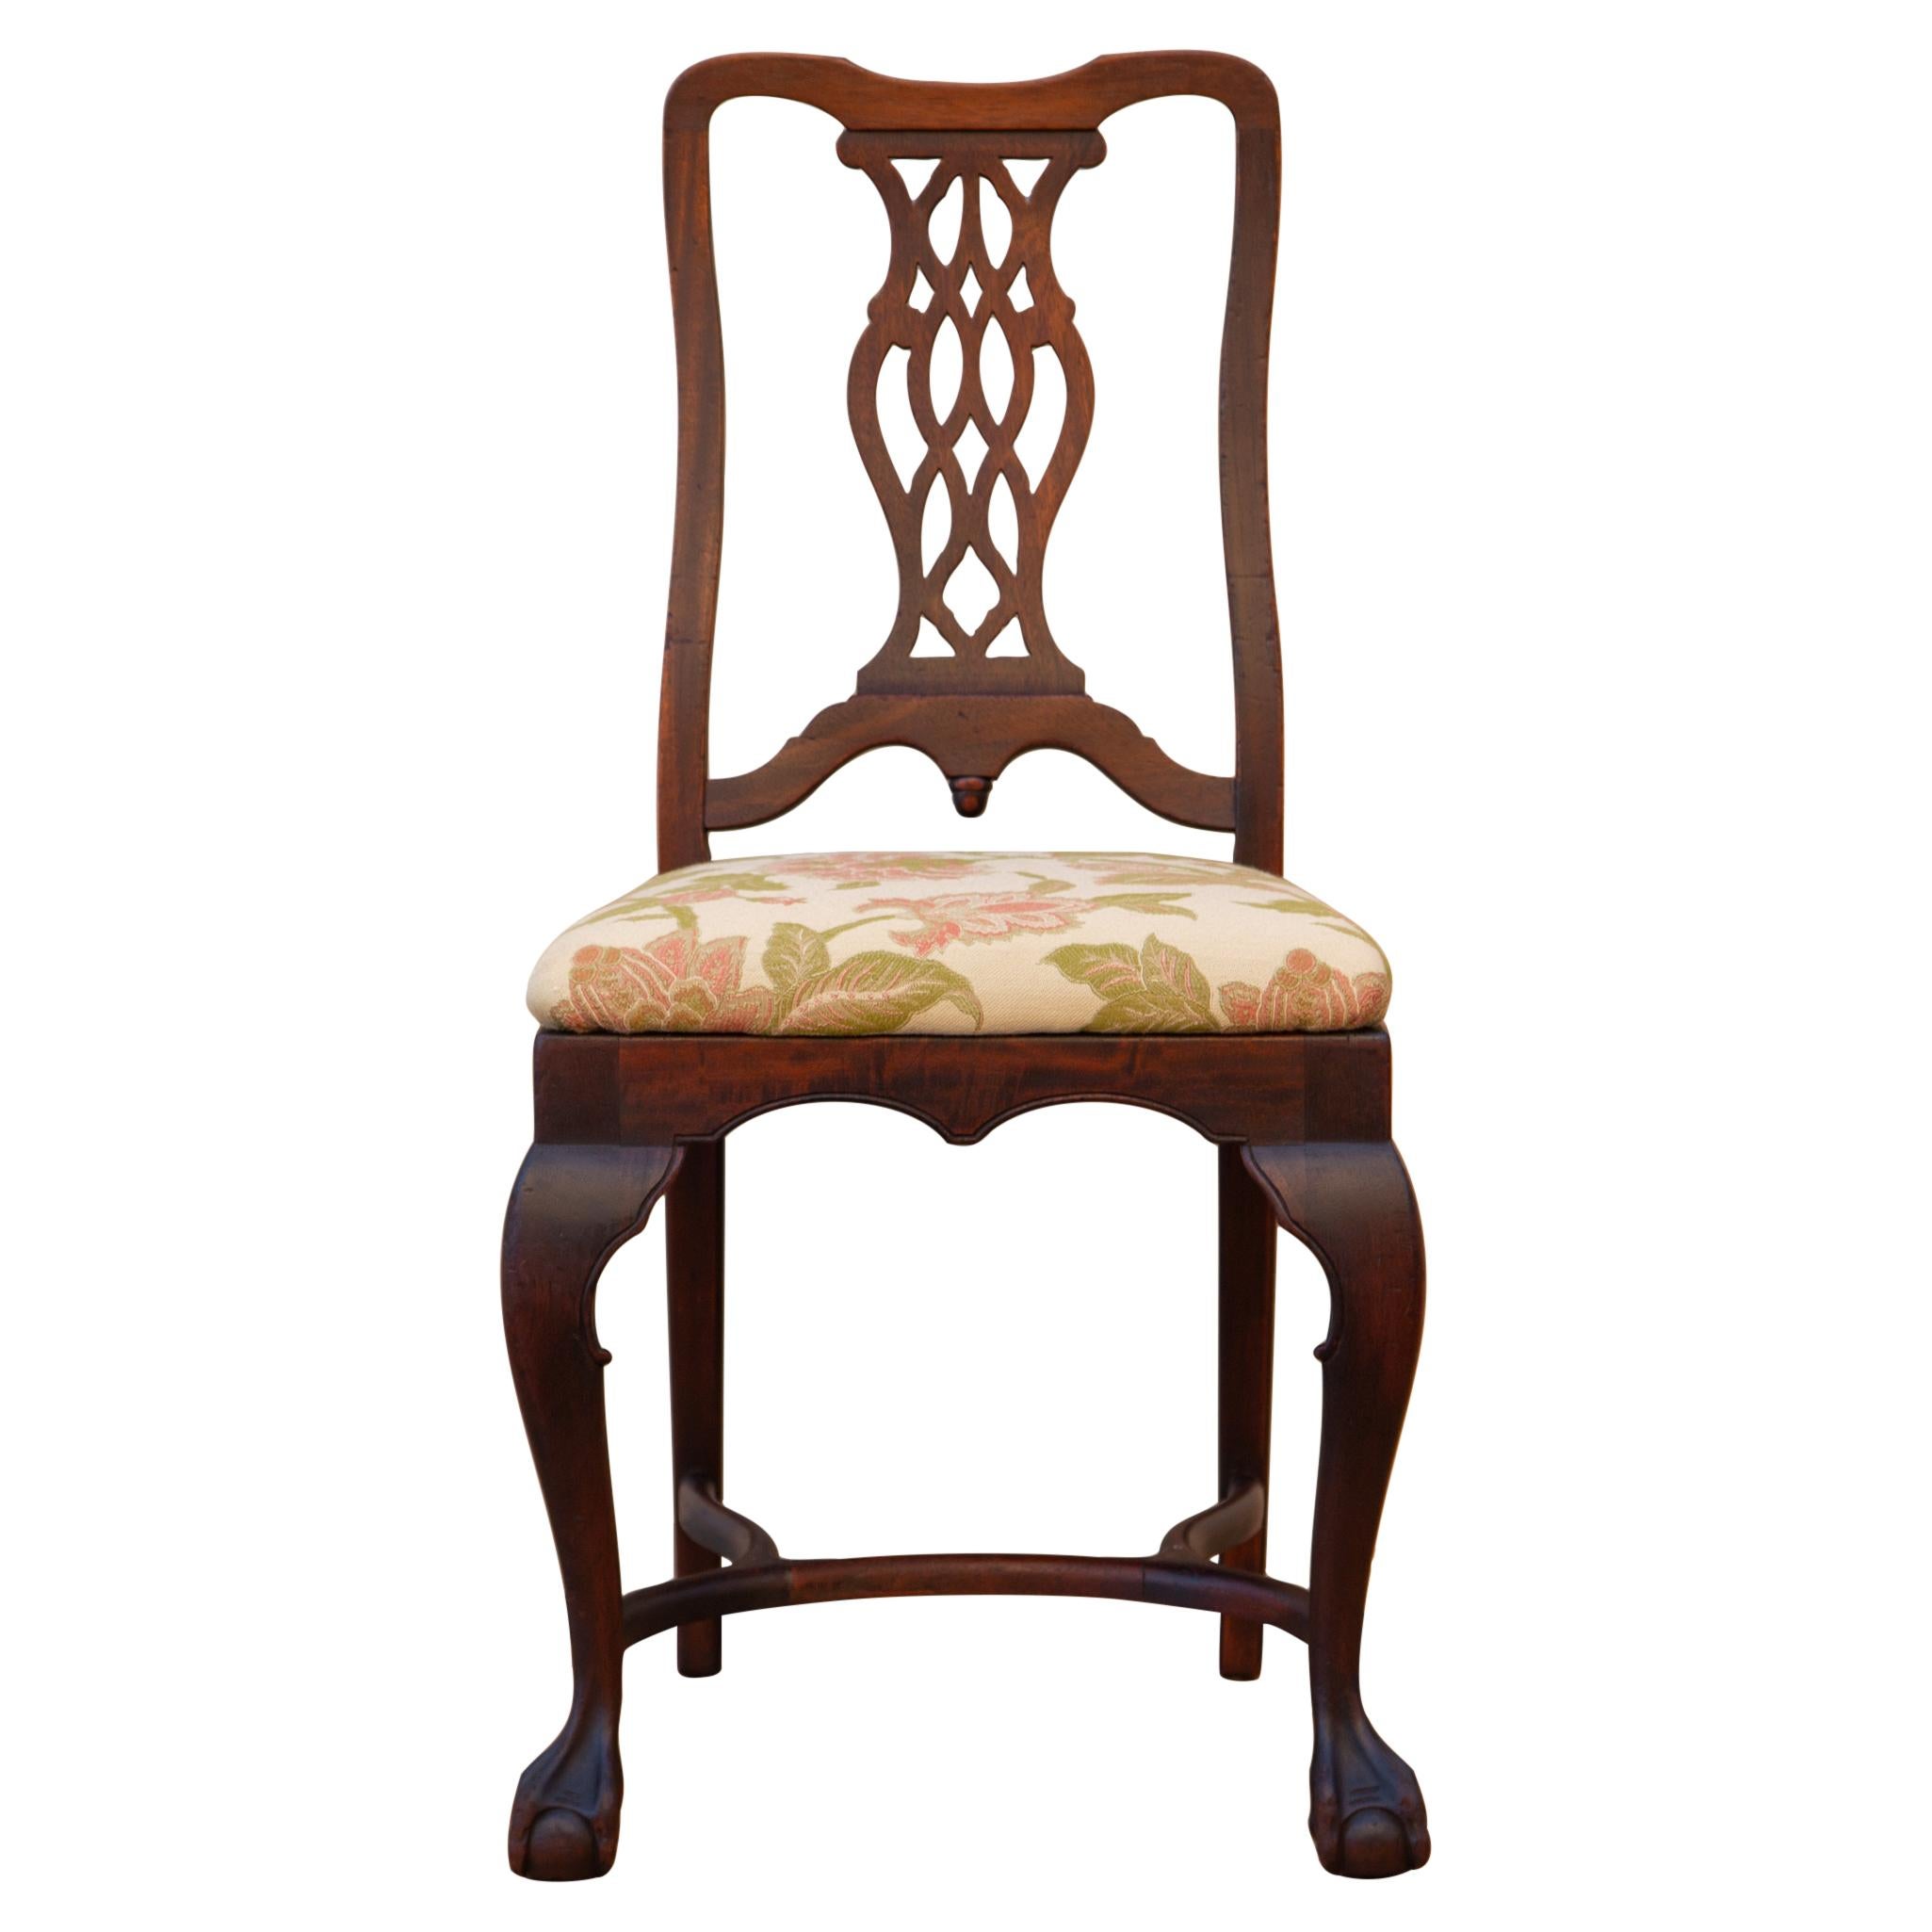 George II-style carved walnut side chair with trapezoid drop in seat, cabriole legs, curved H stretcher and claw and ball feet by Brower Furniture, Grand Rapids MI, circa 1920s. The seat is upholstered in new fabric with coral and green florals